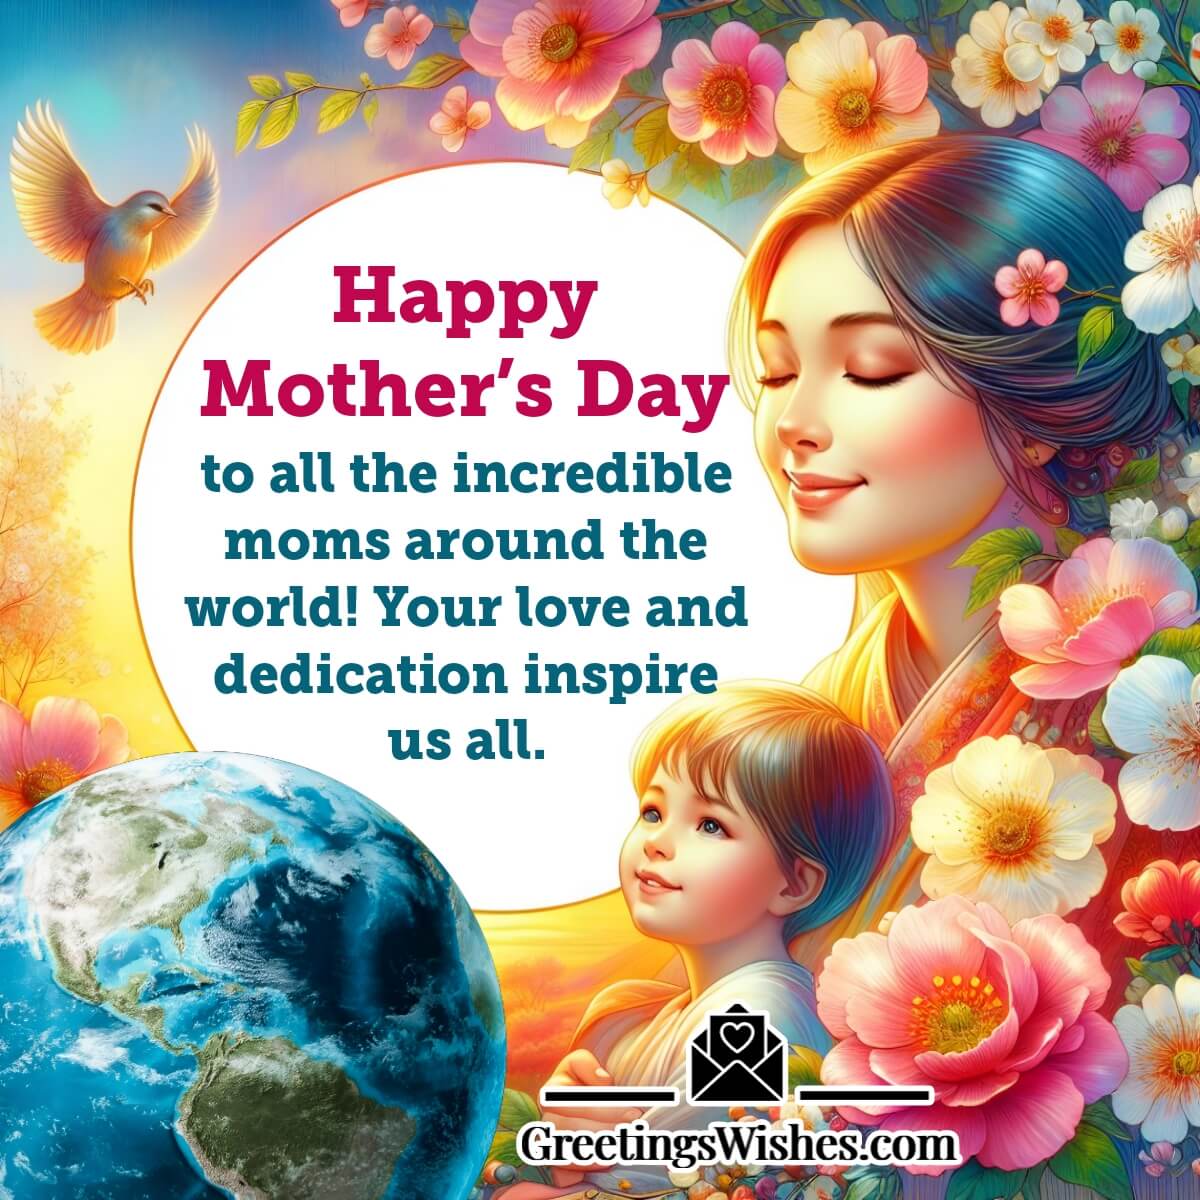 Mother’s Day Wishes For All Mom